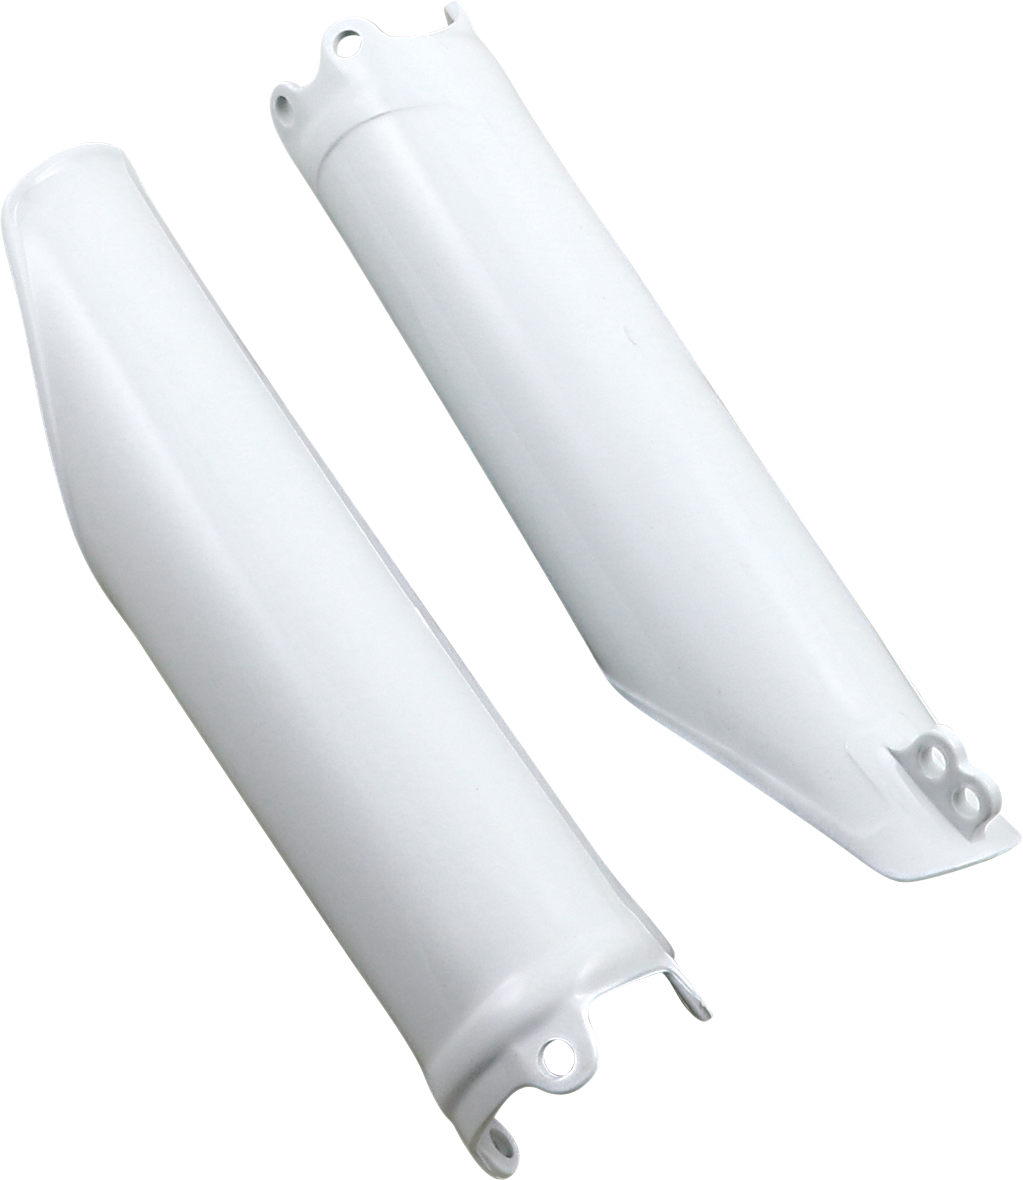 ACERBIS Lower Fork Covers - White 2640300002